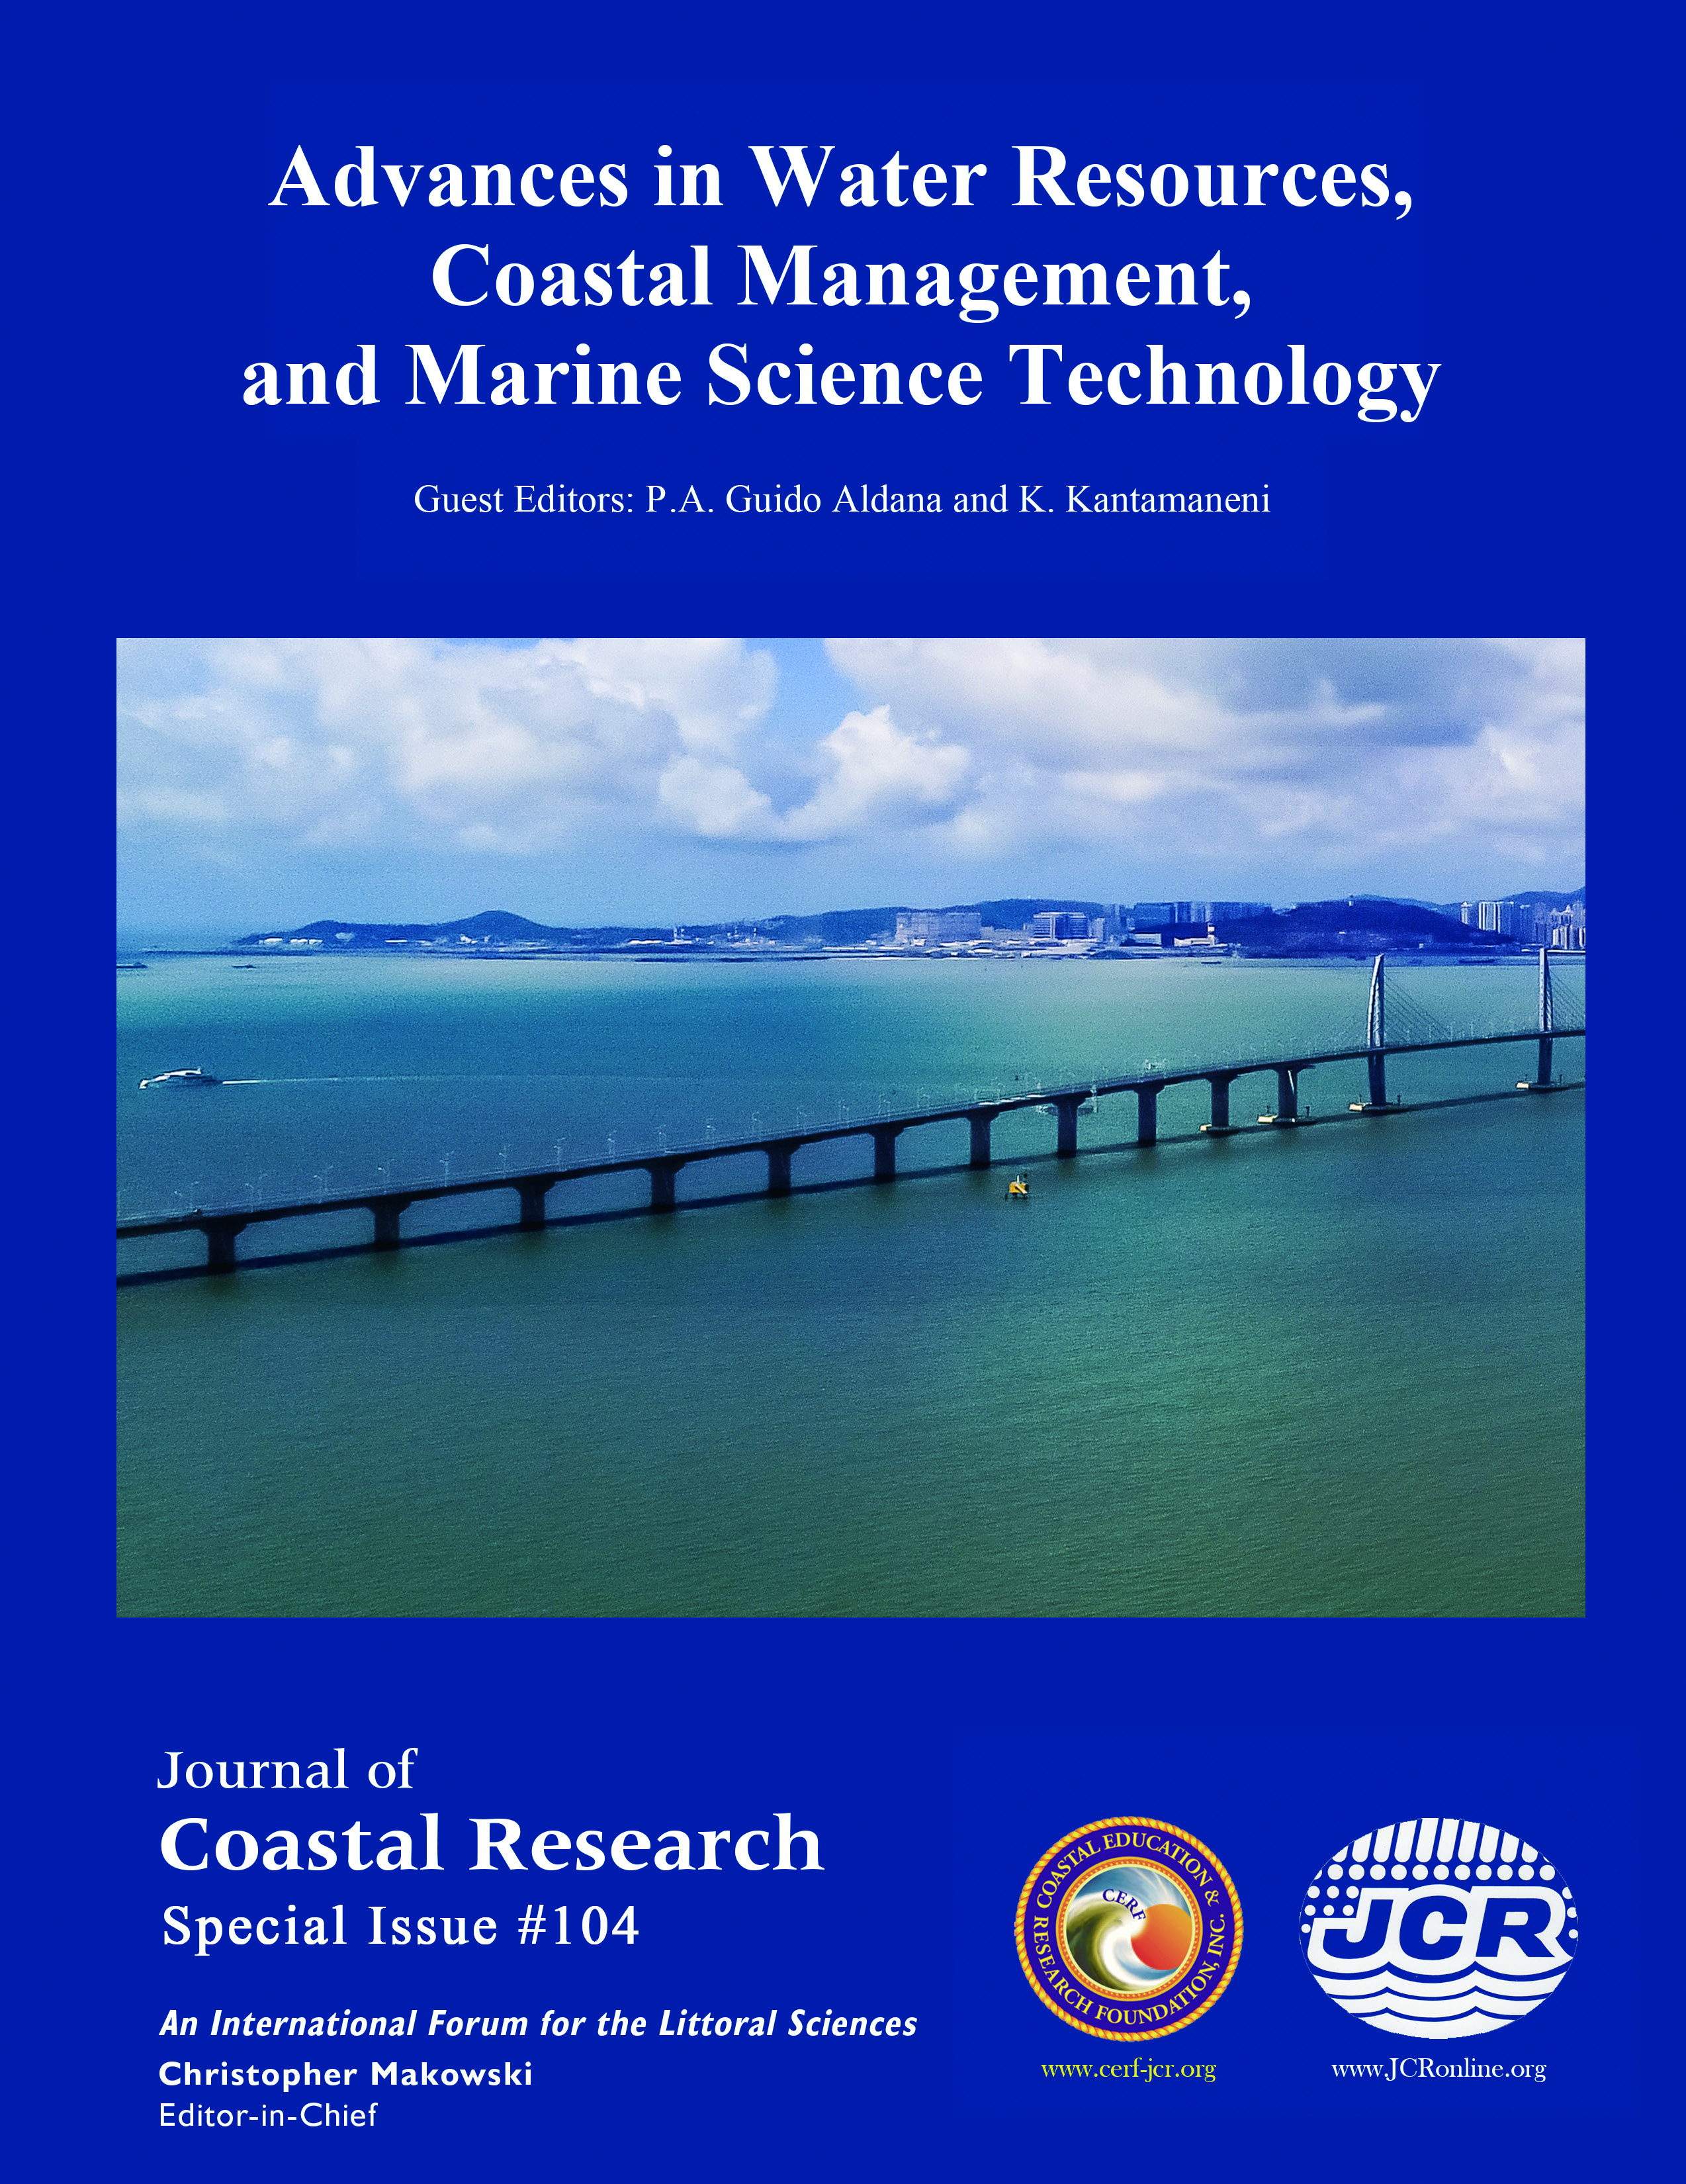 No. 104 - Advances in Water Resources, Coastal Management and Marine Science Technology